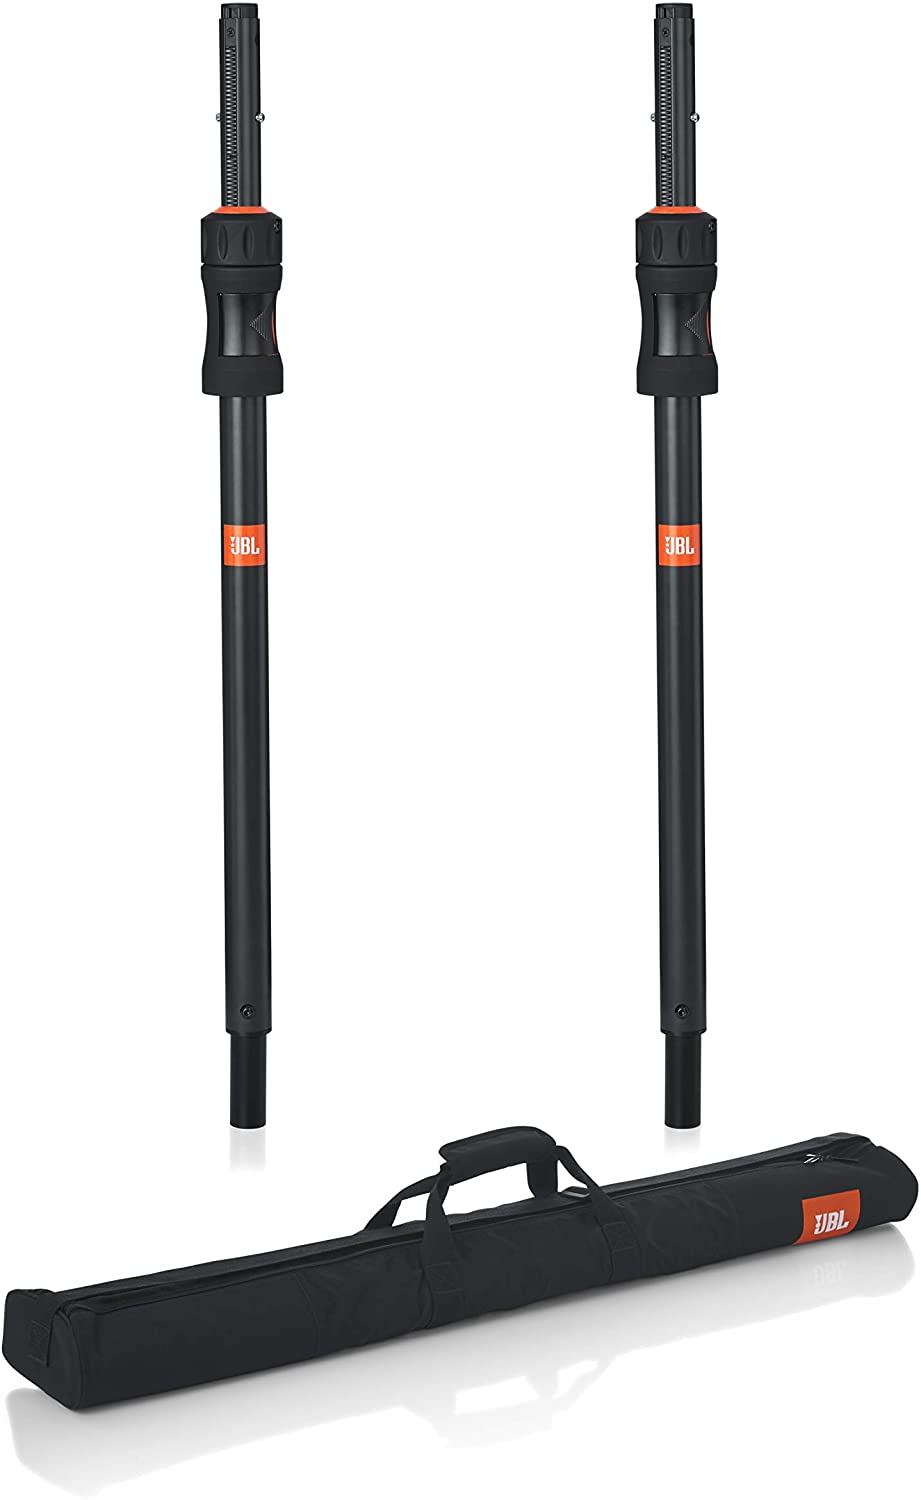 JBL Bags Deluxe Sub Pole with Piston-Assist Automatic Height Adjustment; Pair of (2) with carry Bag (JBLSUBPOLEPROSET) - image 1 of 3